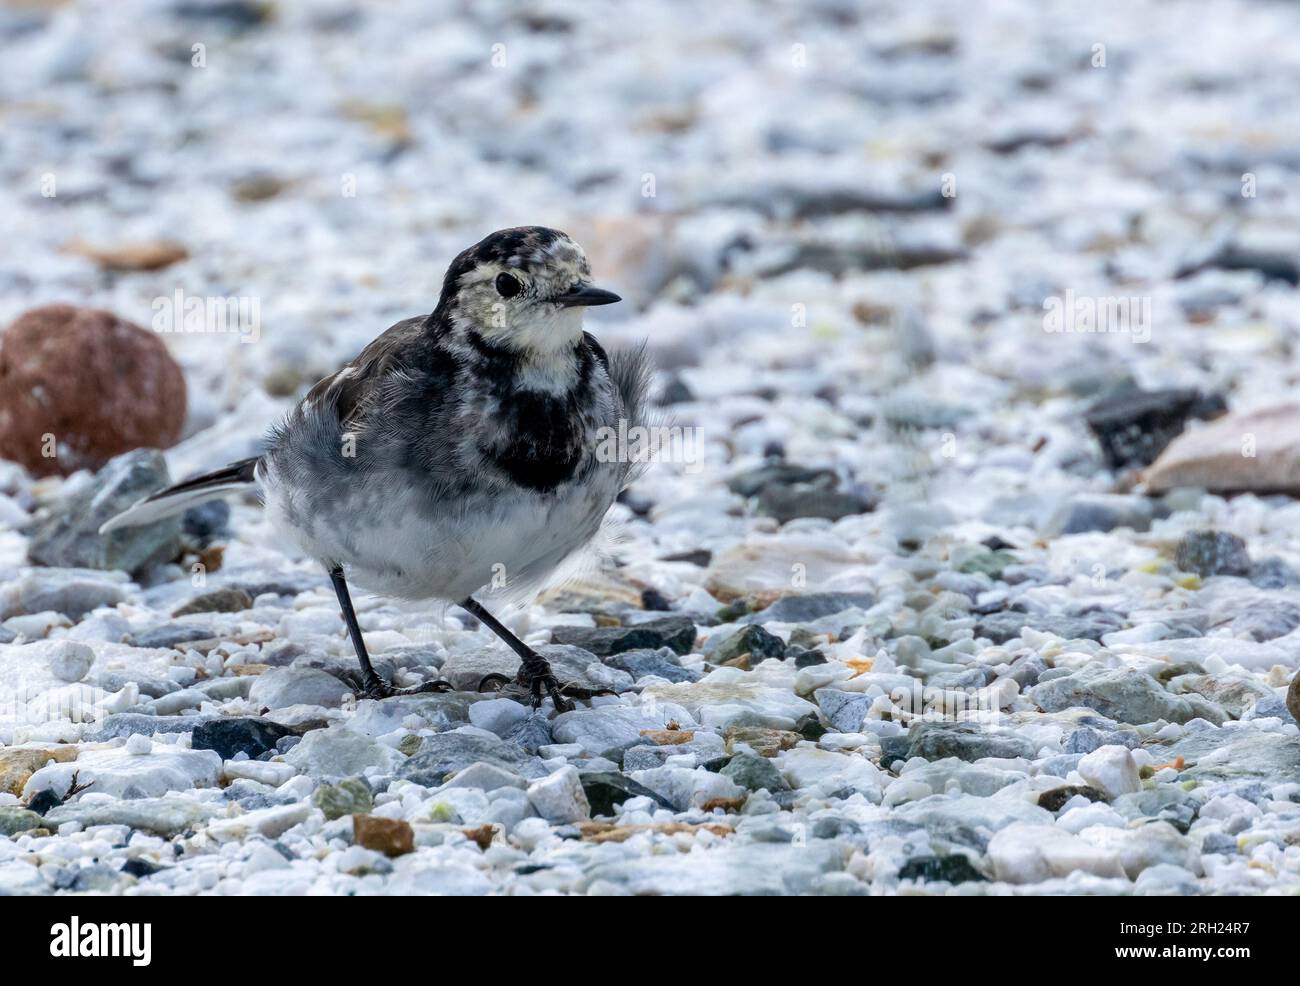 Juvenile fluffy feathered pied wagtail small bird walking over white gravel stones Stock Photo